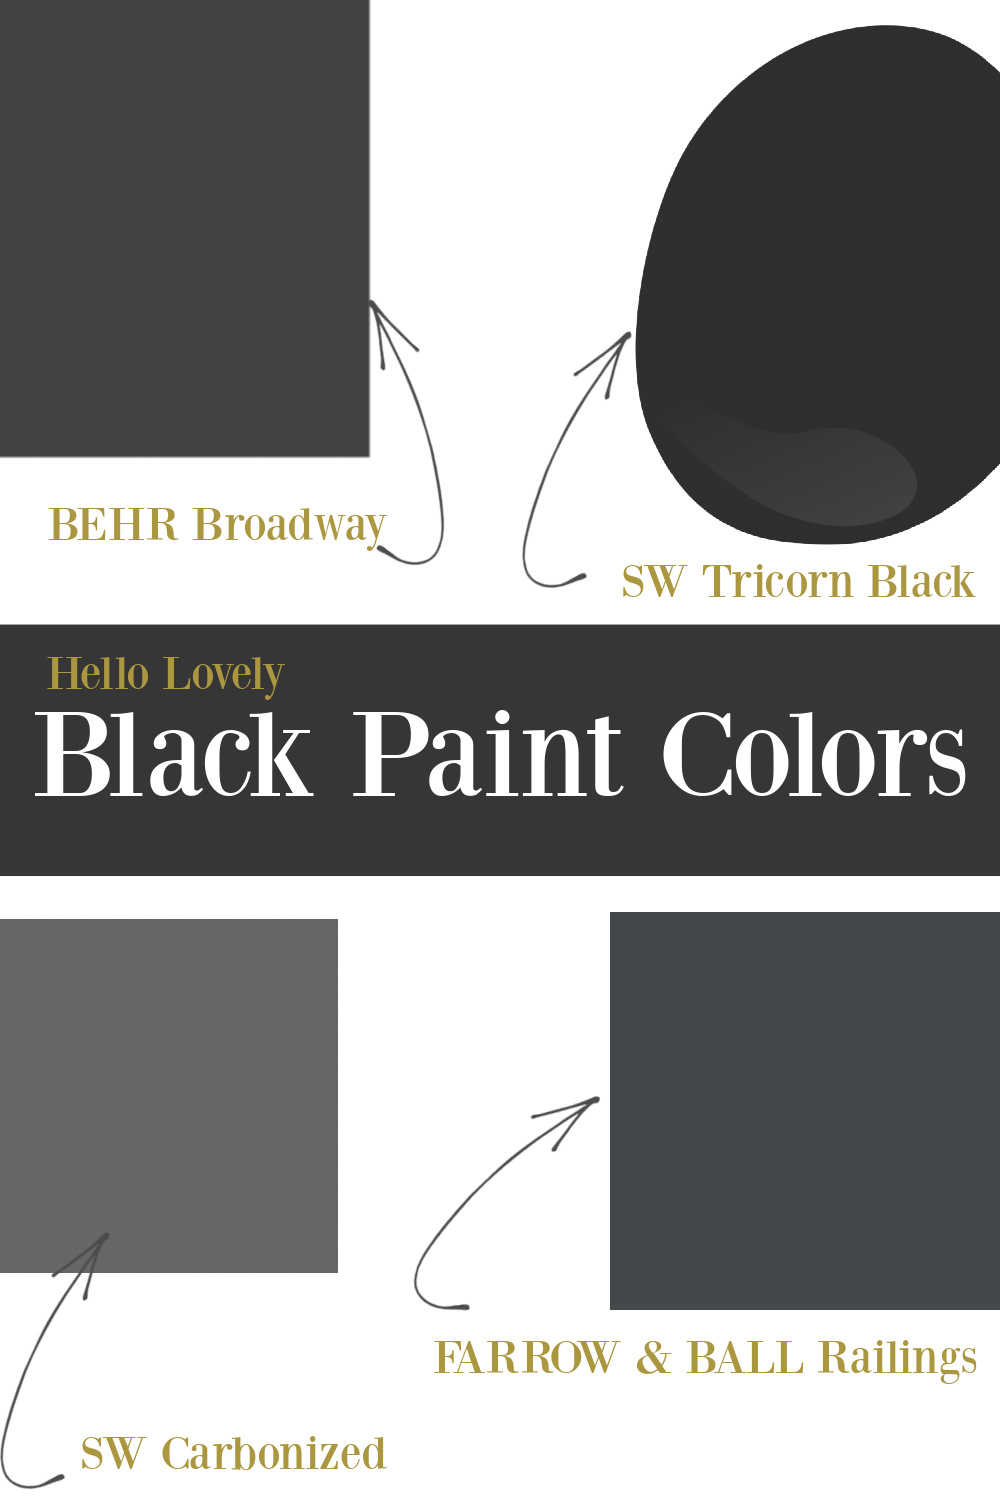 Black Paint Colors - ideas for using black on walls or cabinets - Hello Lovely Studio. #paintcolors #blackpaint